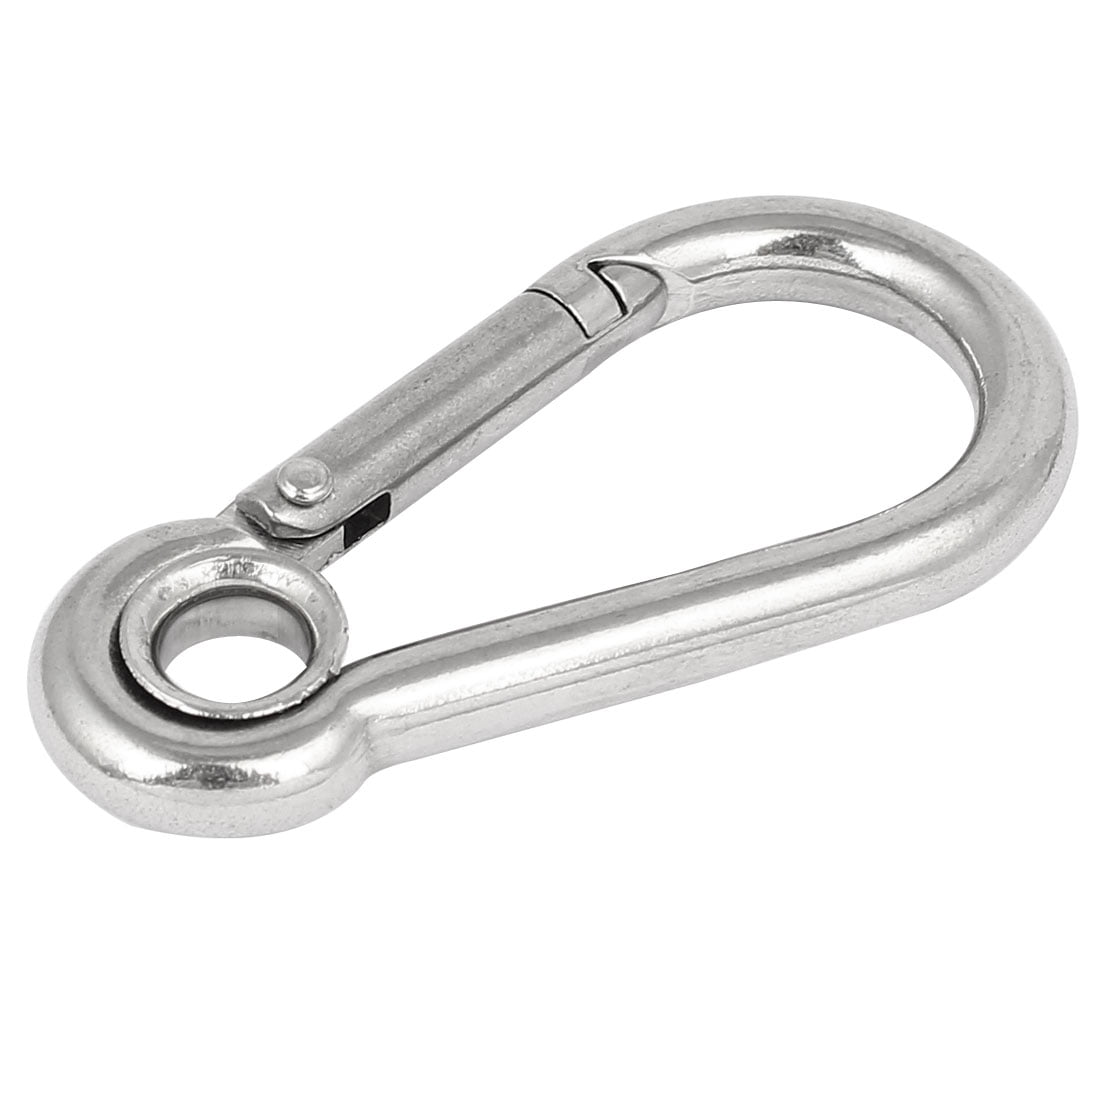 Camping Climbing Stainless Carabiner Clip Snap Hook Quick Hitch 6 